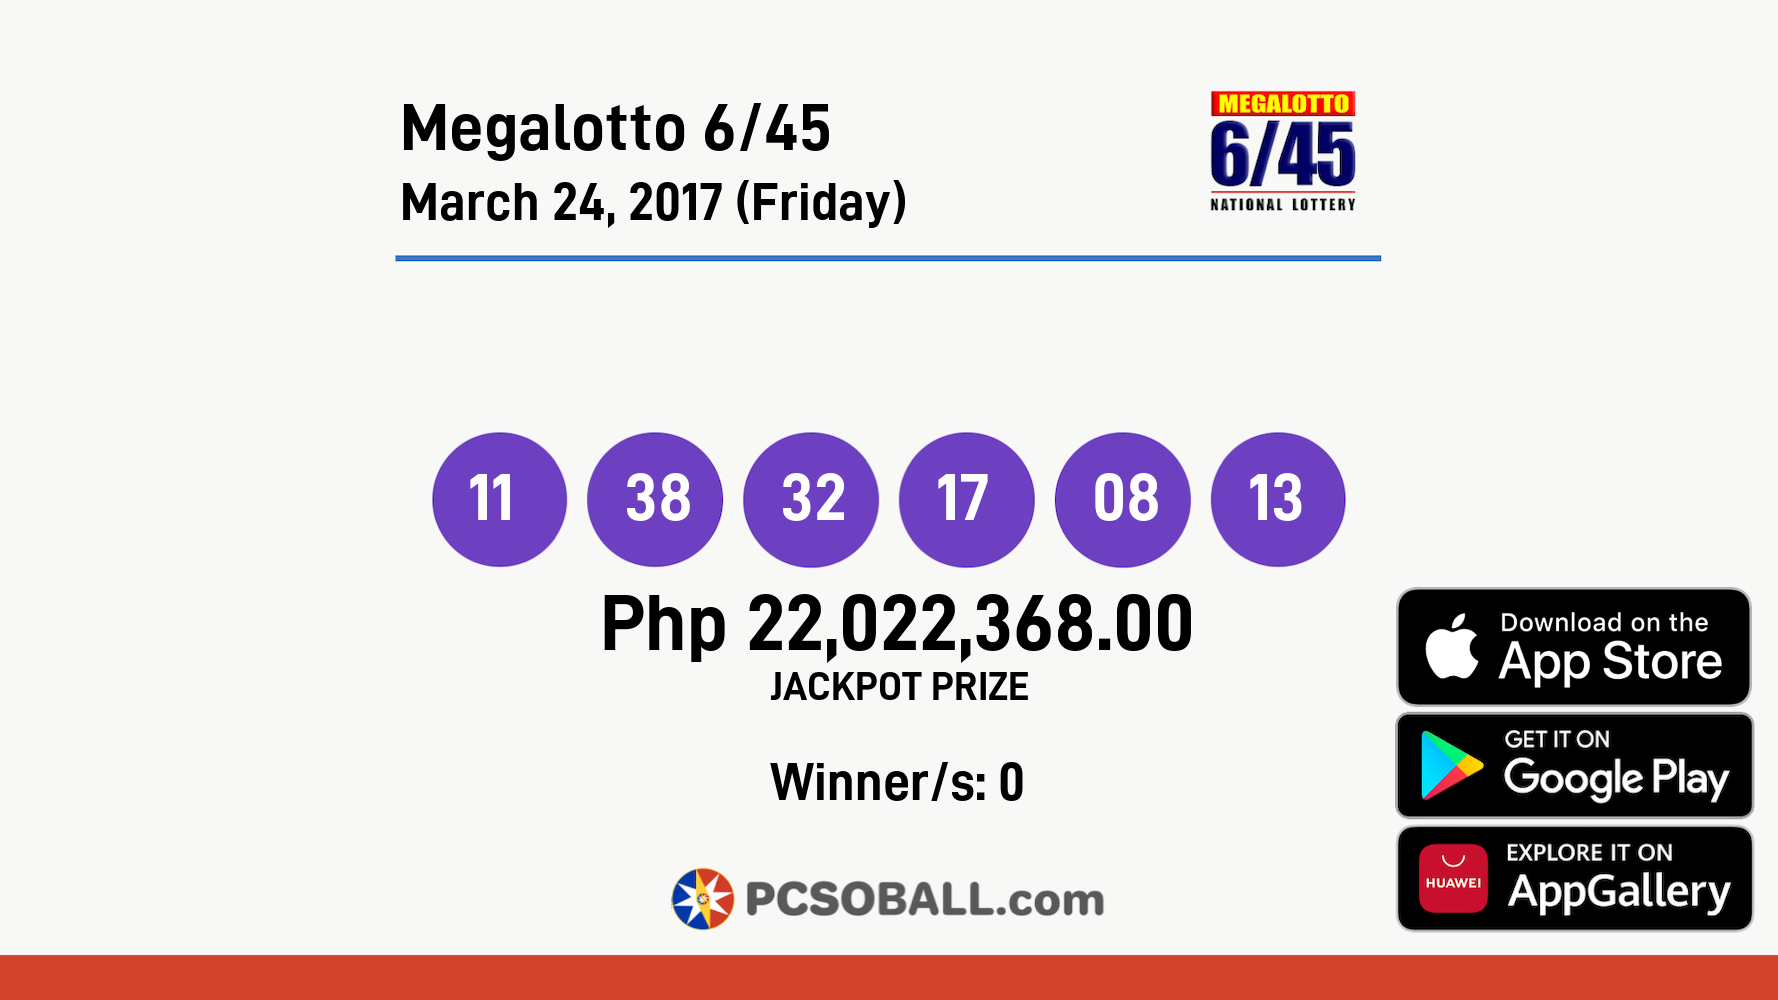 Megalotto 6/45 March 24, 2017 (Friday) Result